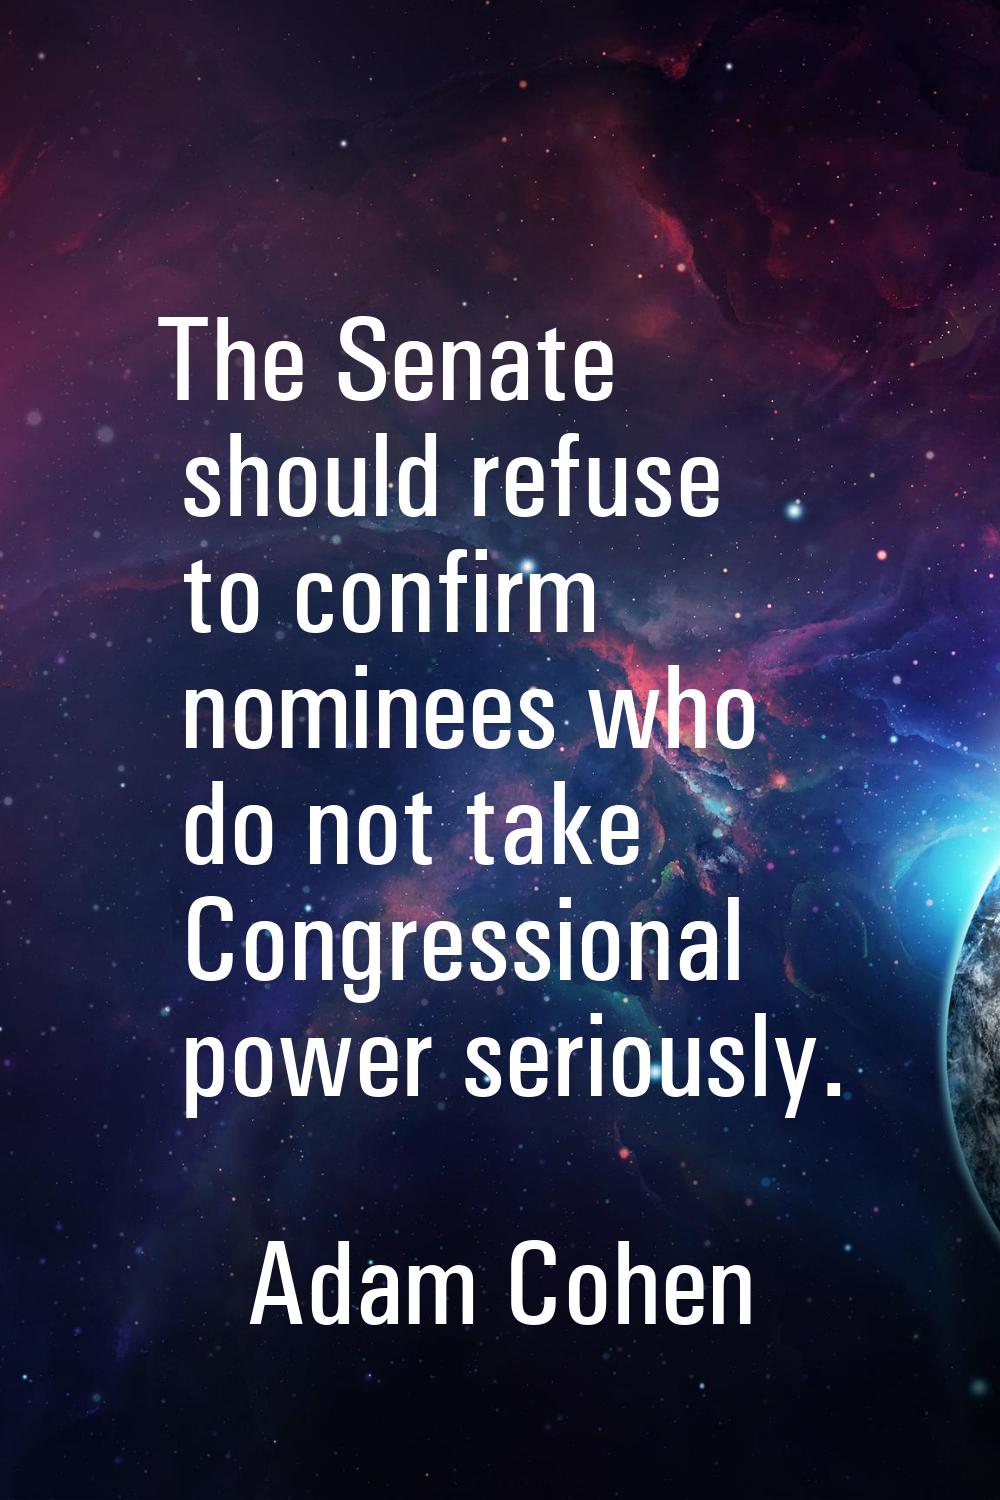 The Senate should refuse to confirm nominees who do not take Congressional power seriously.